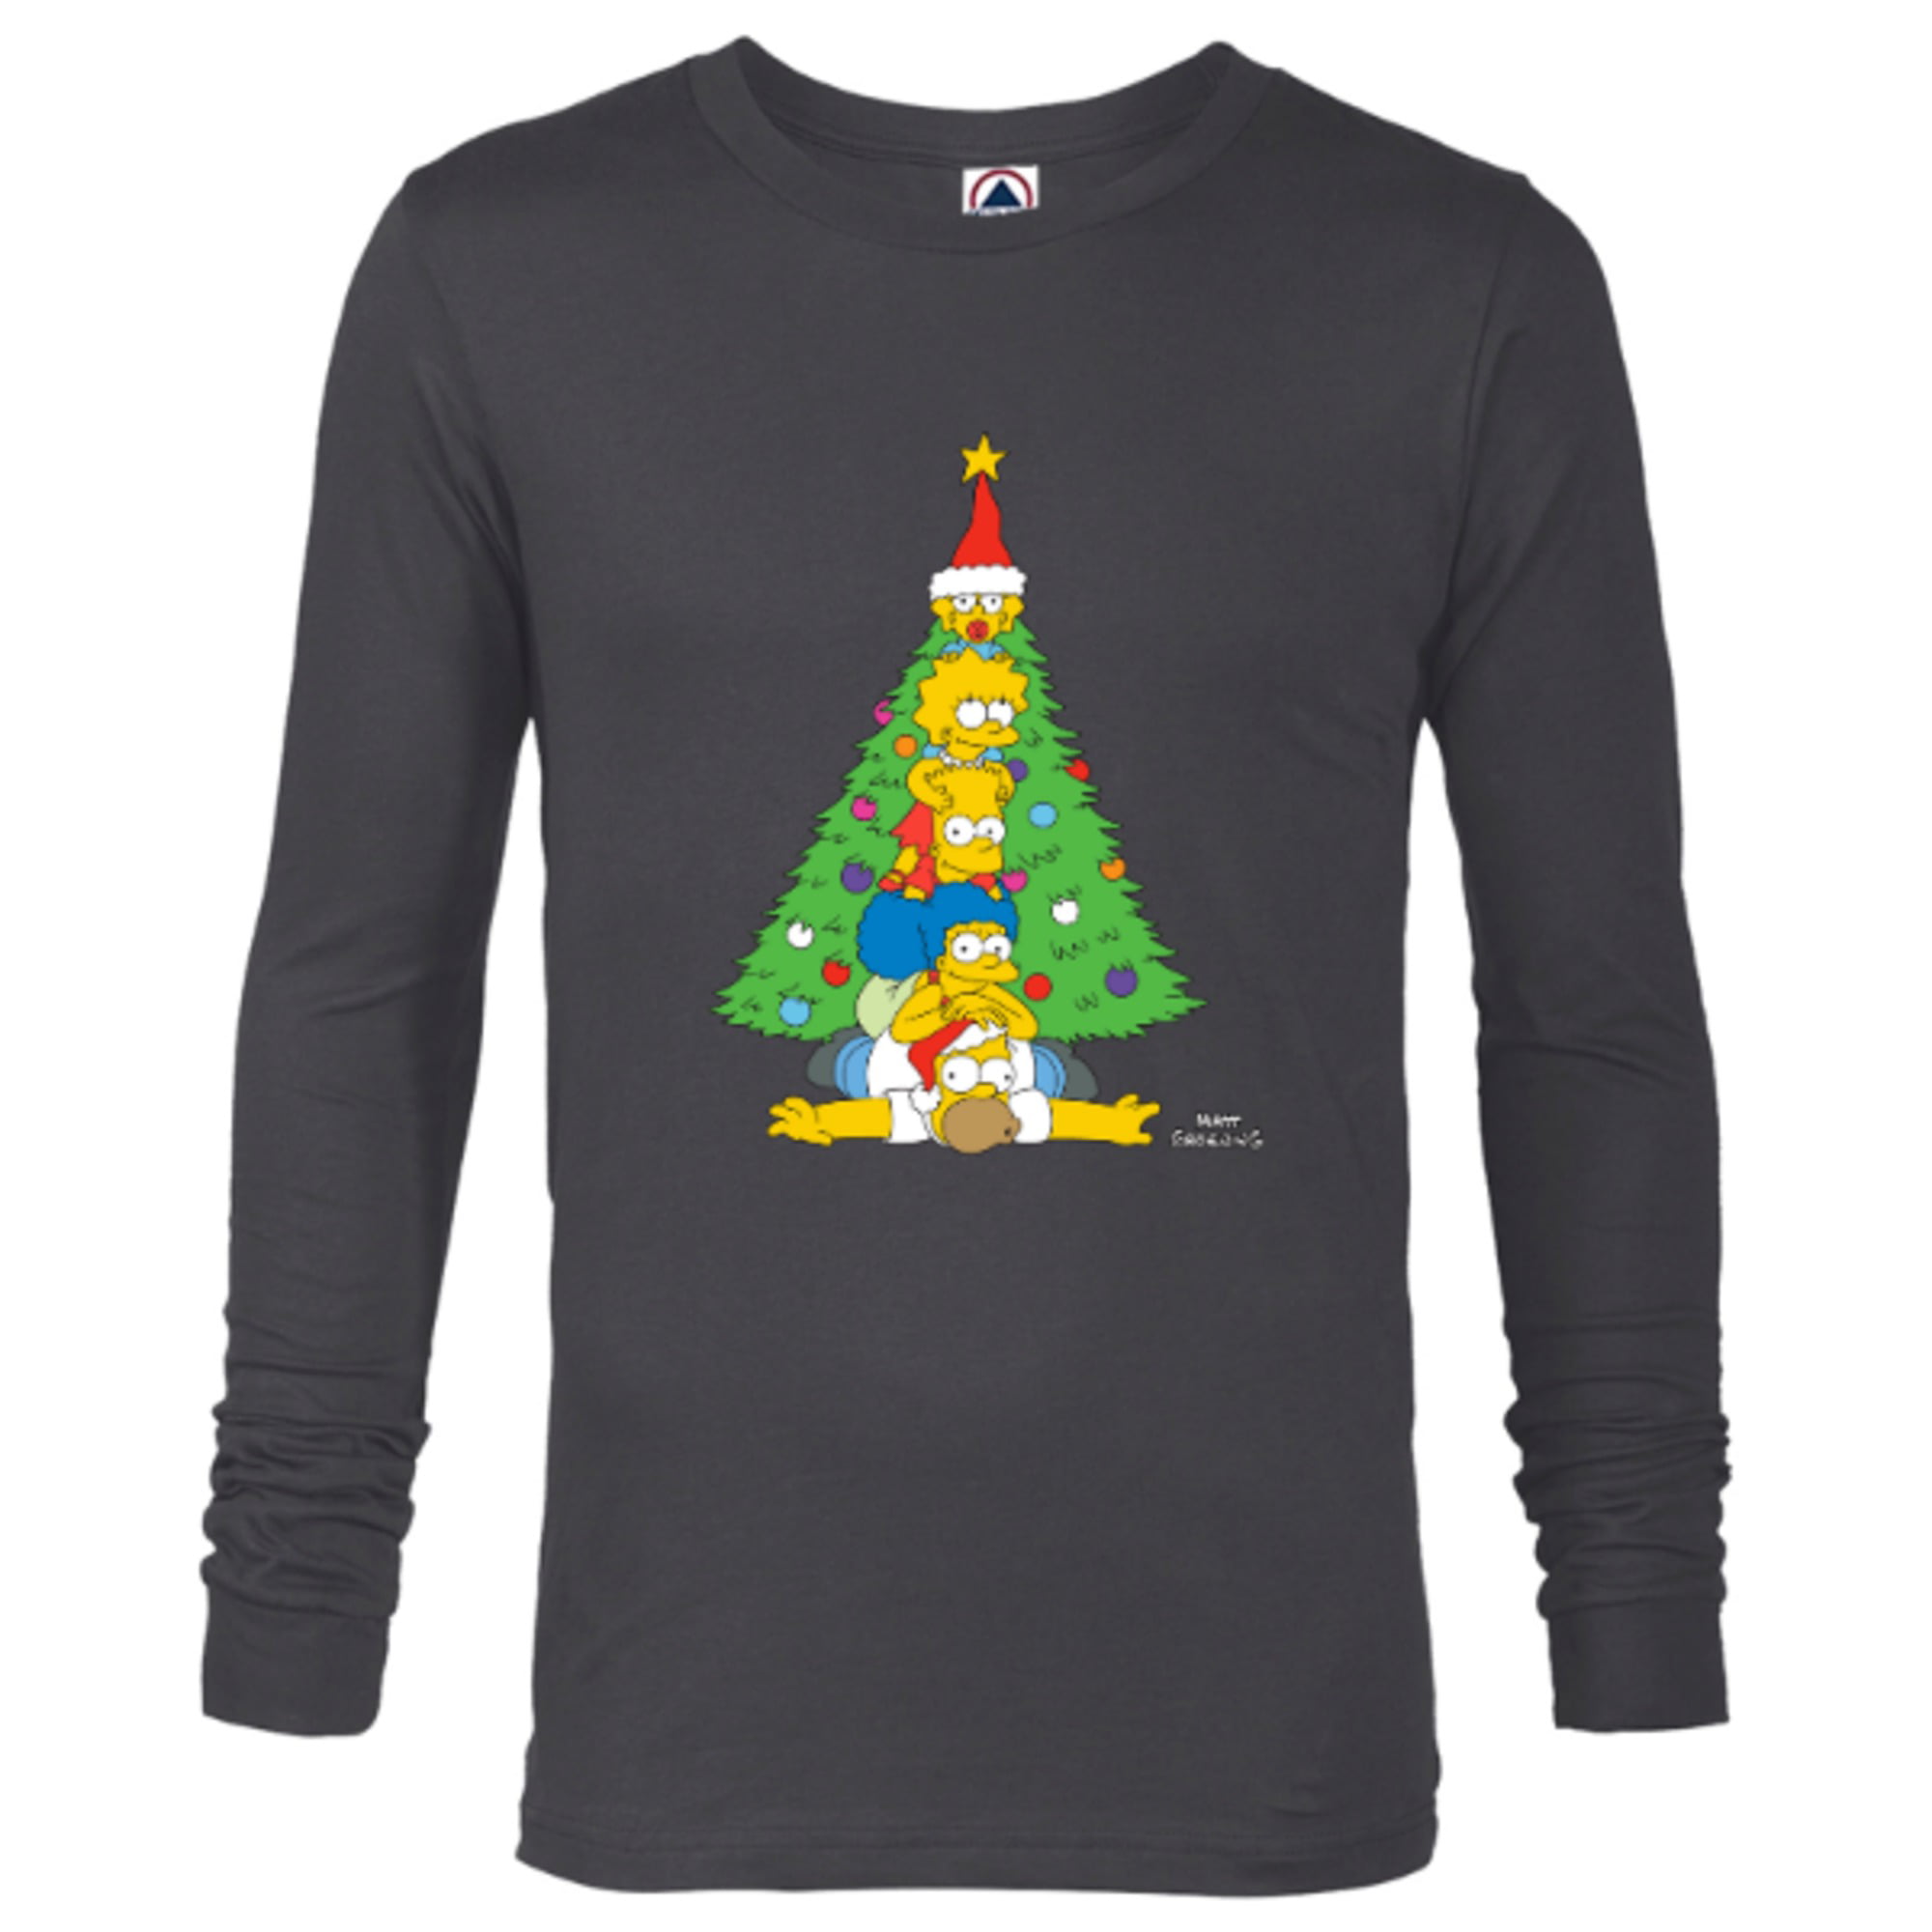 Simpsons Sleeve - Customized-New Long Red T-Shirt Christmas Holiday Tree Men – for The Family